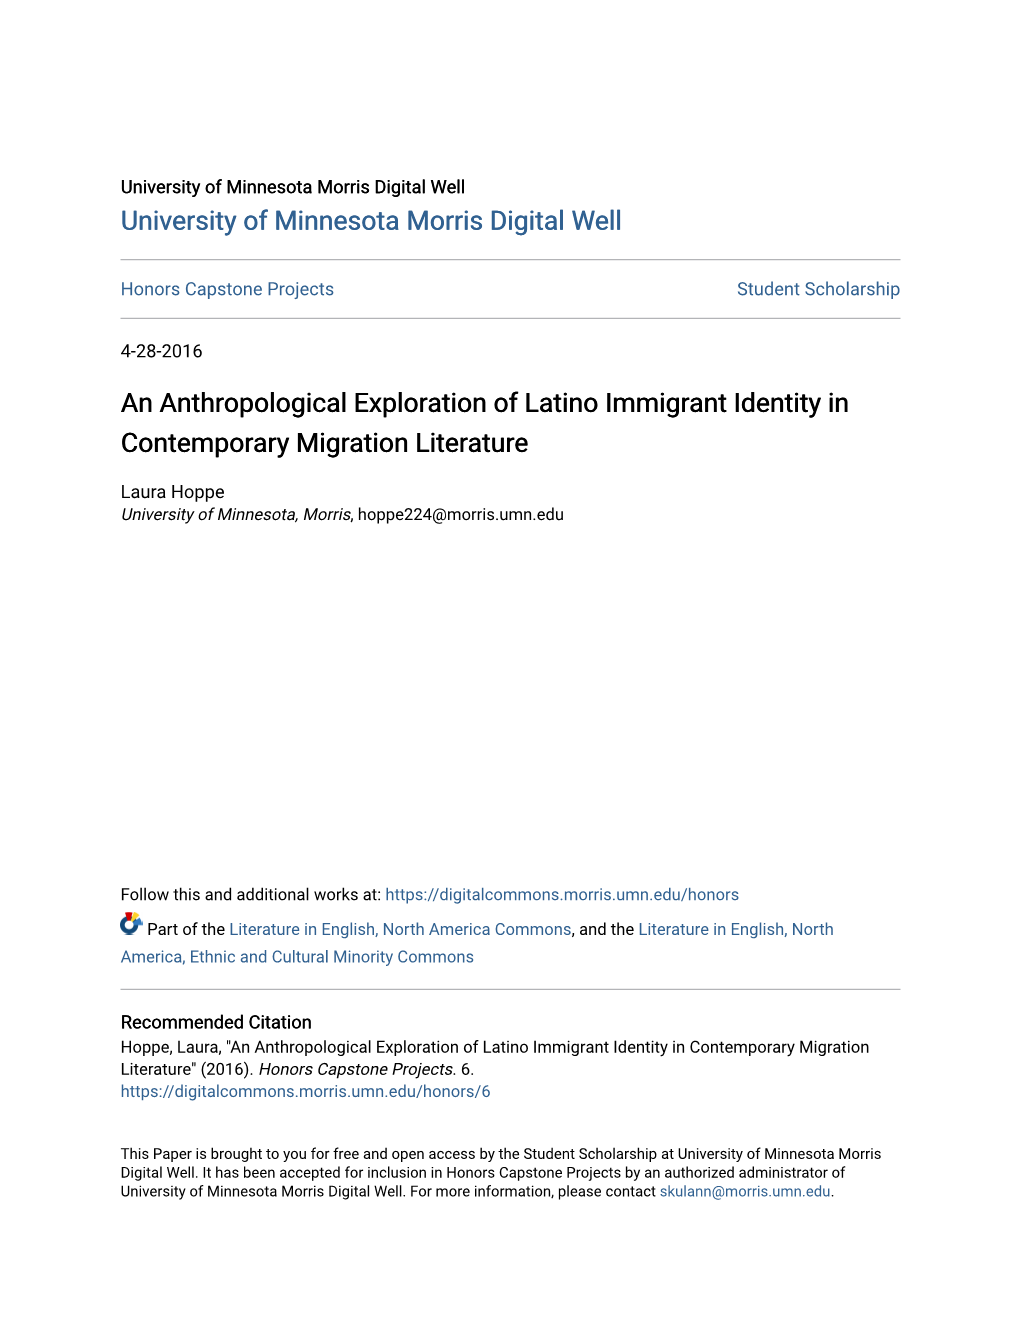 An Anthropological Exploration of Latino Immigrant Identity in Contemporary Migration Literature